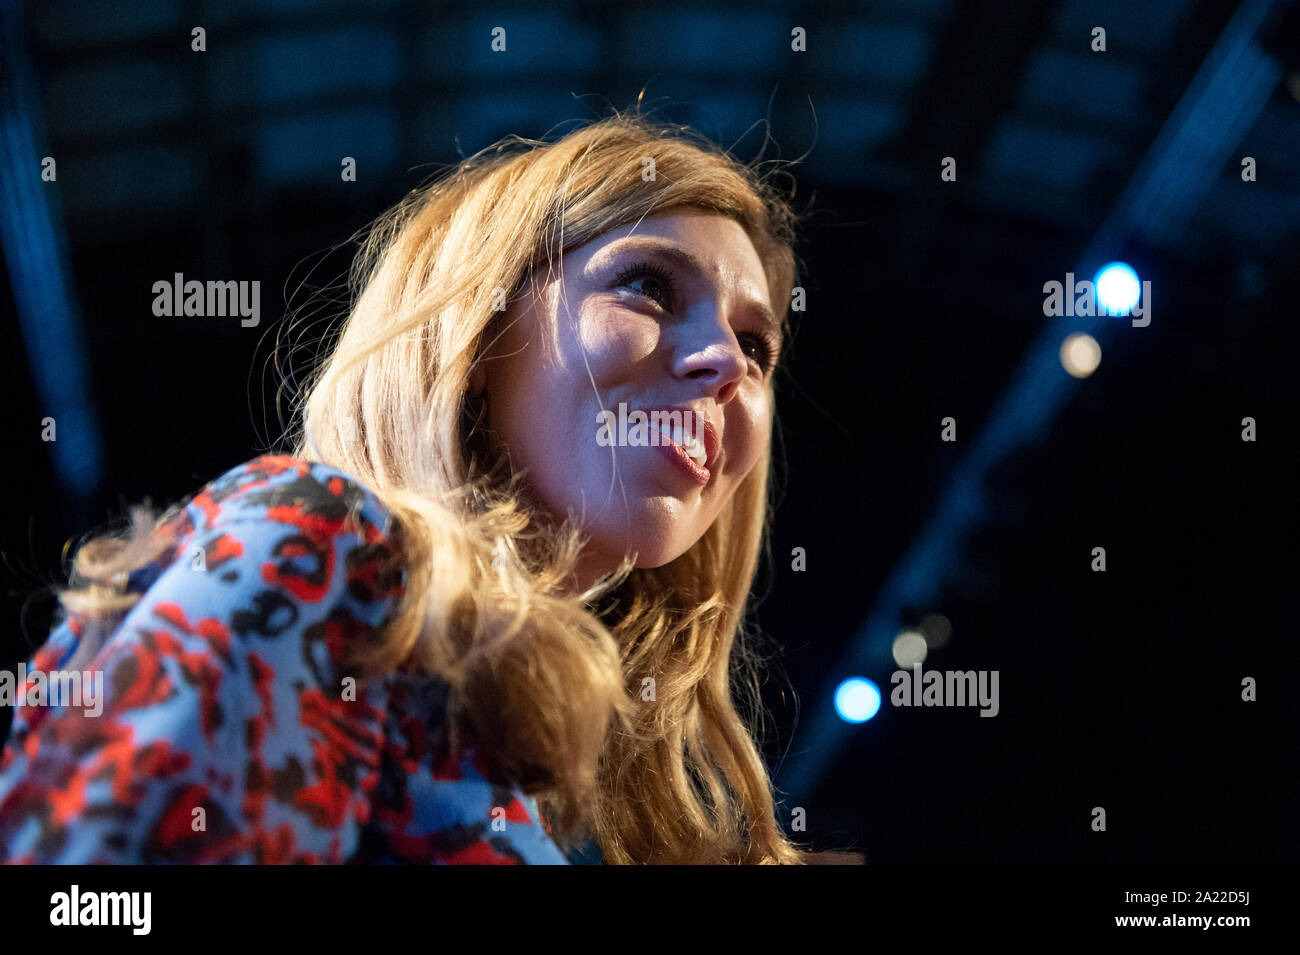 Manchester, UK. 30th September 2019. Conservationist Carrie Symonds, partner of Prime Minister Boris Johnson, attends day two of the Conservative Party Conference in Manchester. © Russell Hart/Alamy Live News. Stock Photo